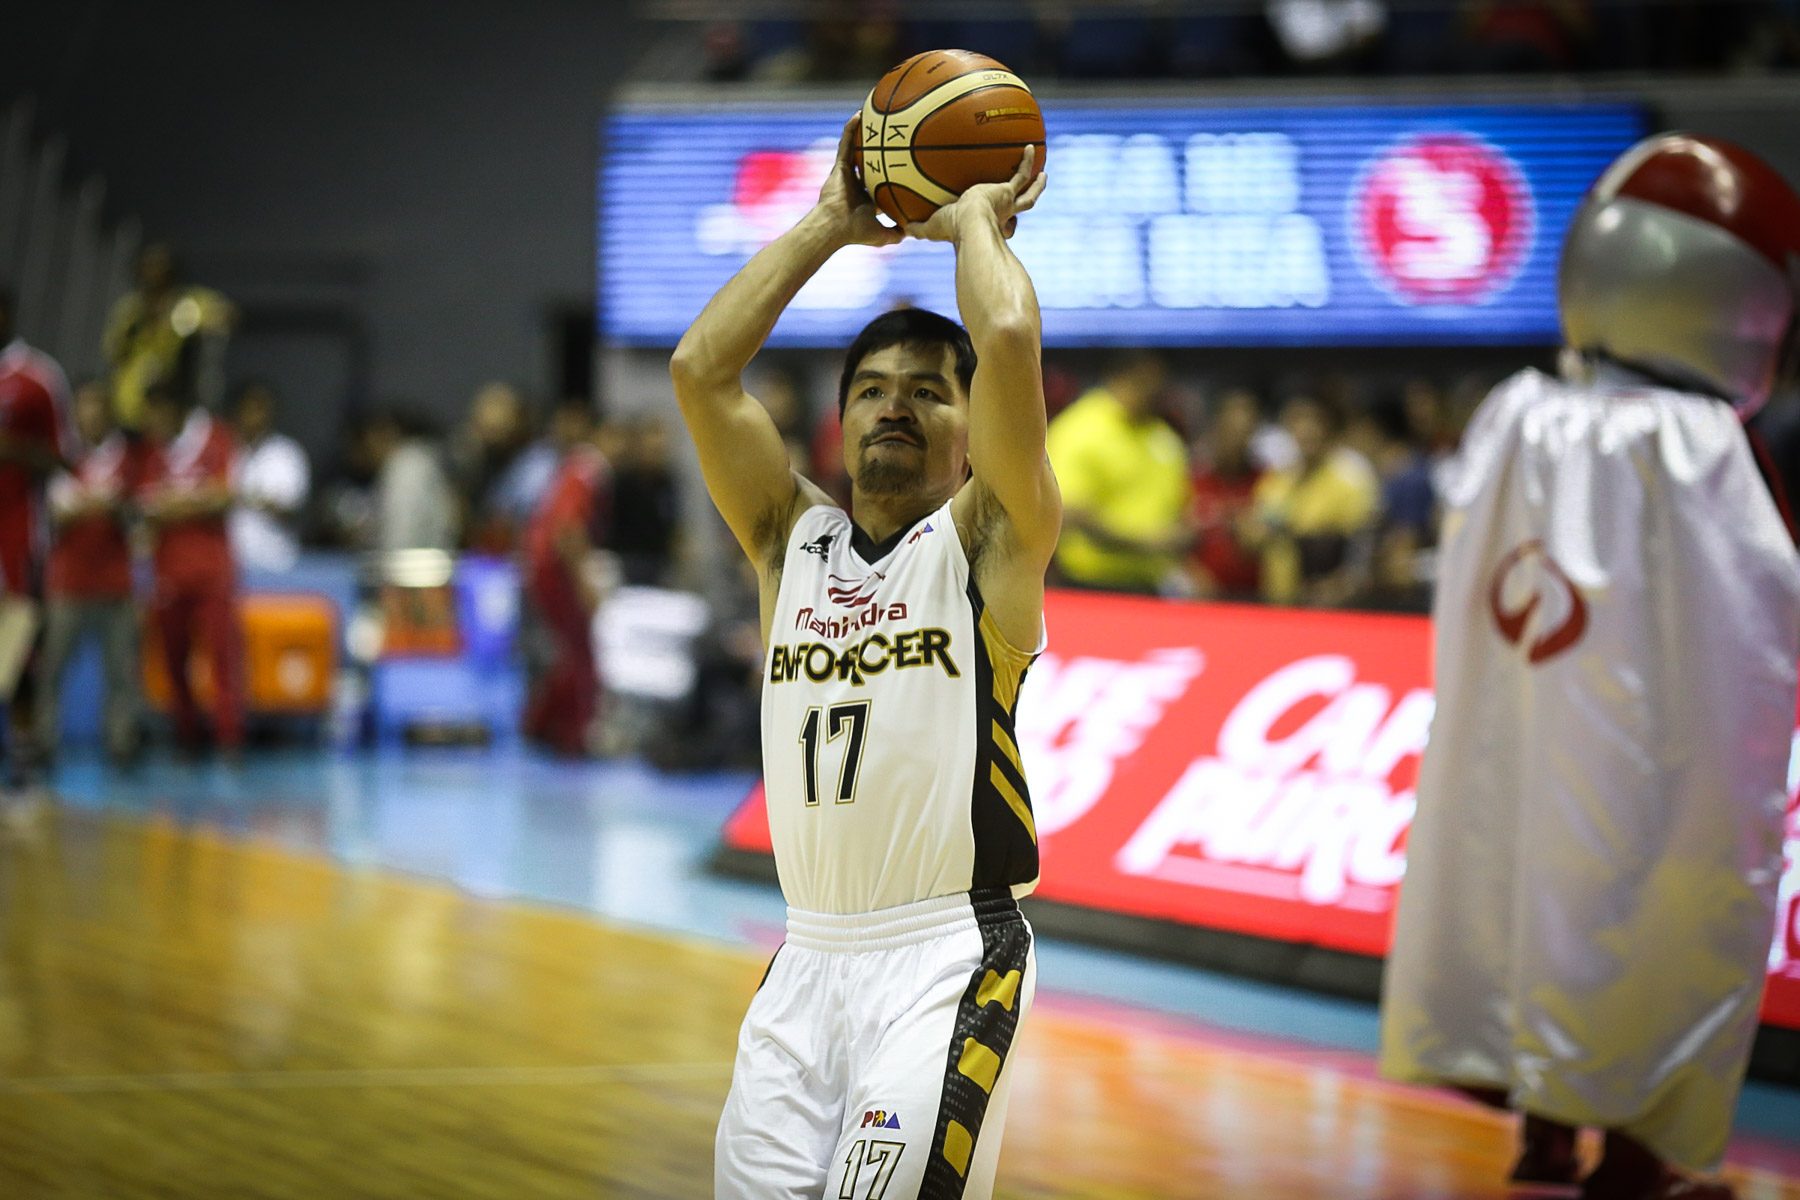 WATCH: Pacquiao warms up in return to PBA